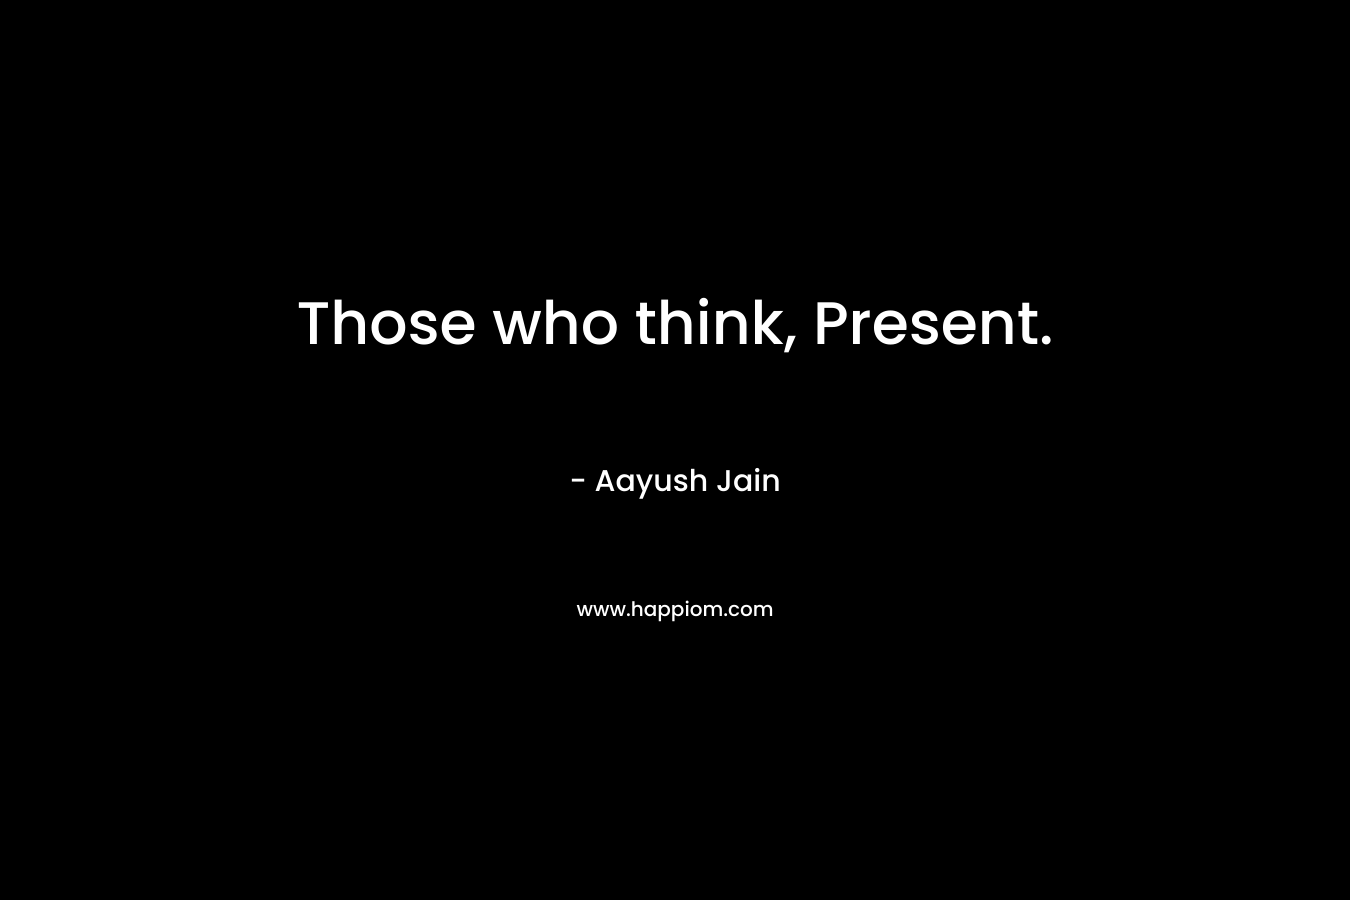 Those who think, Present.